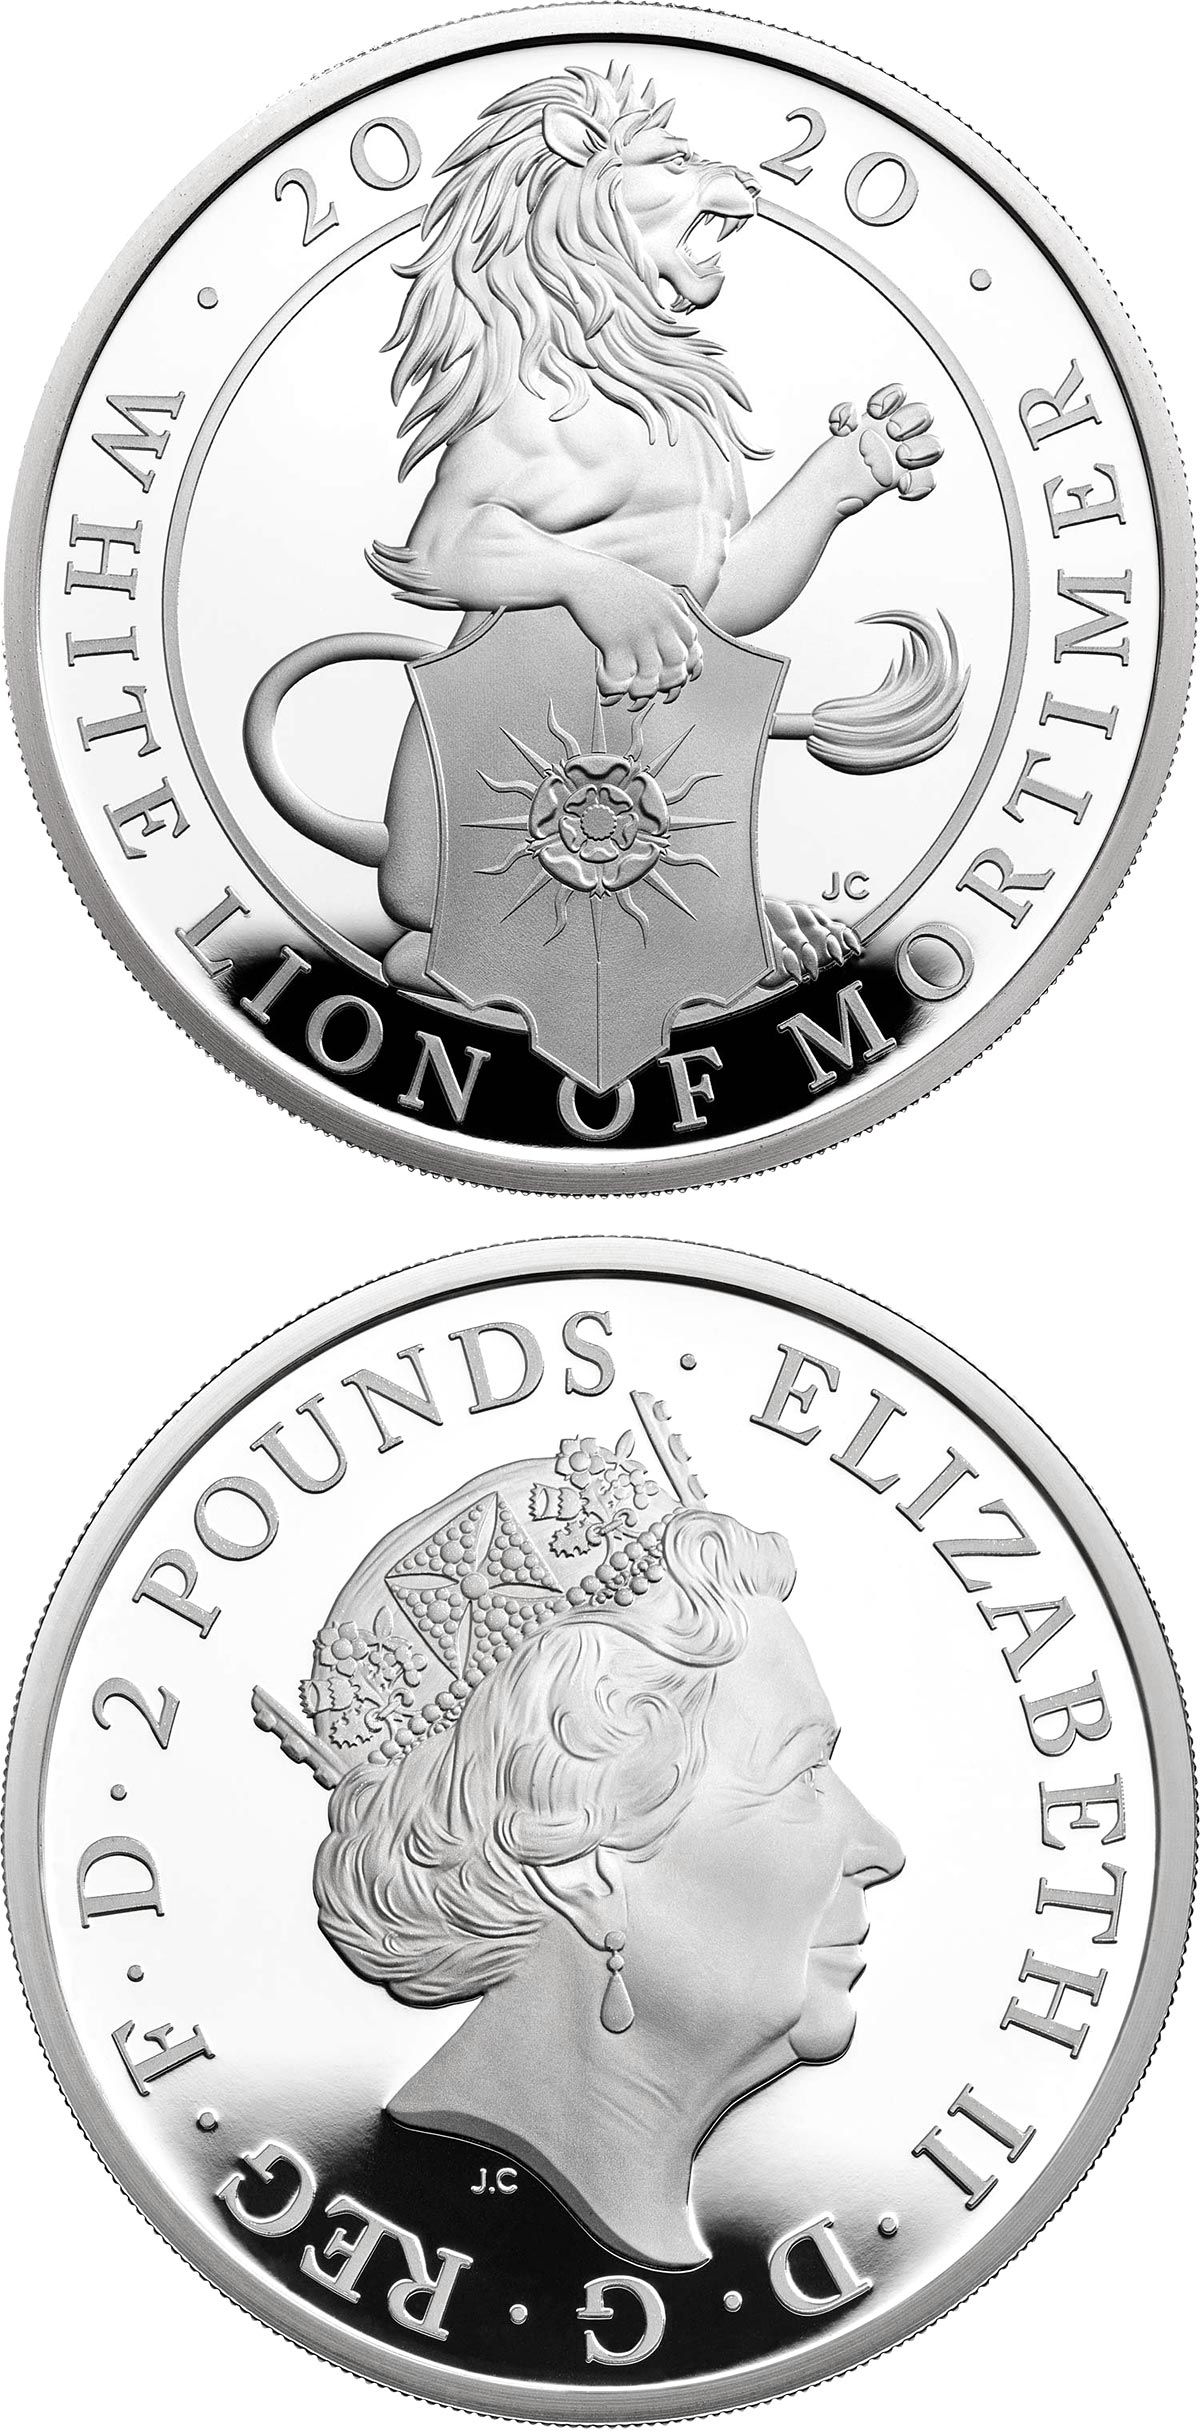 Image of 2 pounds coin - The White Lion of Mortimer | United Kingdom 2020.  The Silver coin is of Proof quality.